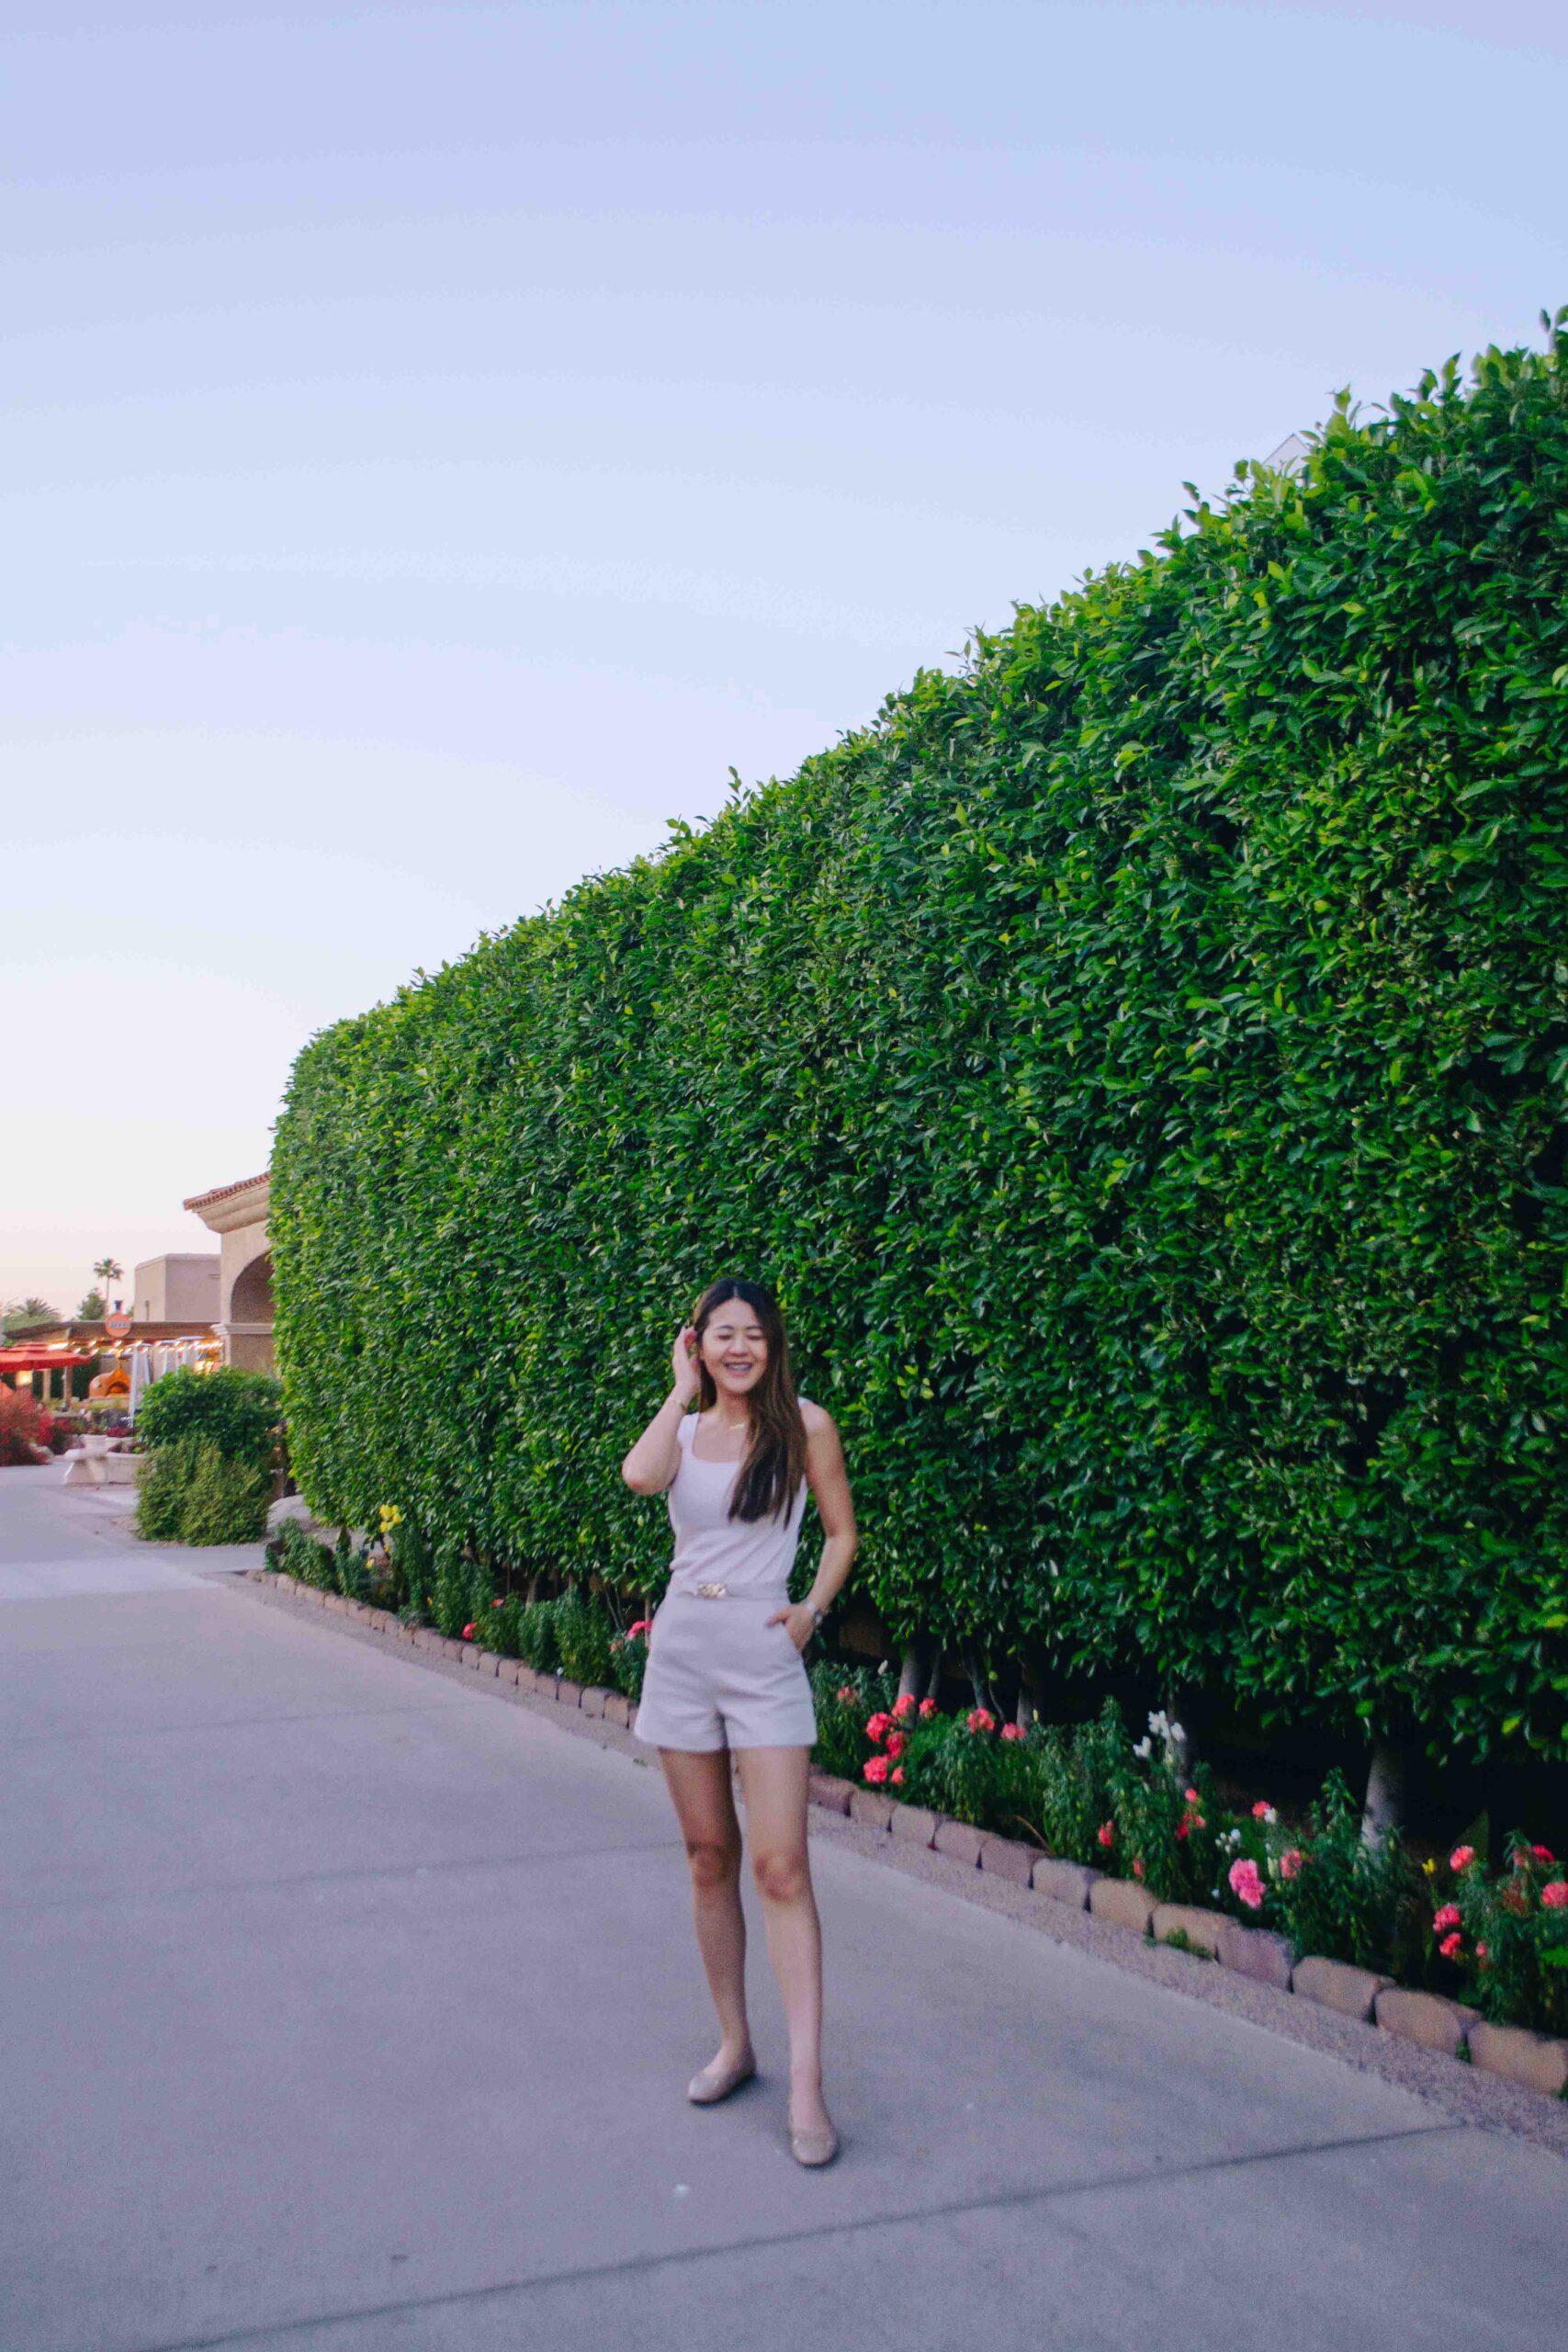 Lifestyle blogger Demi Bang escaping the Arizona heat at a Scottsdale resort.